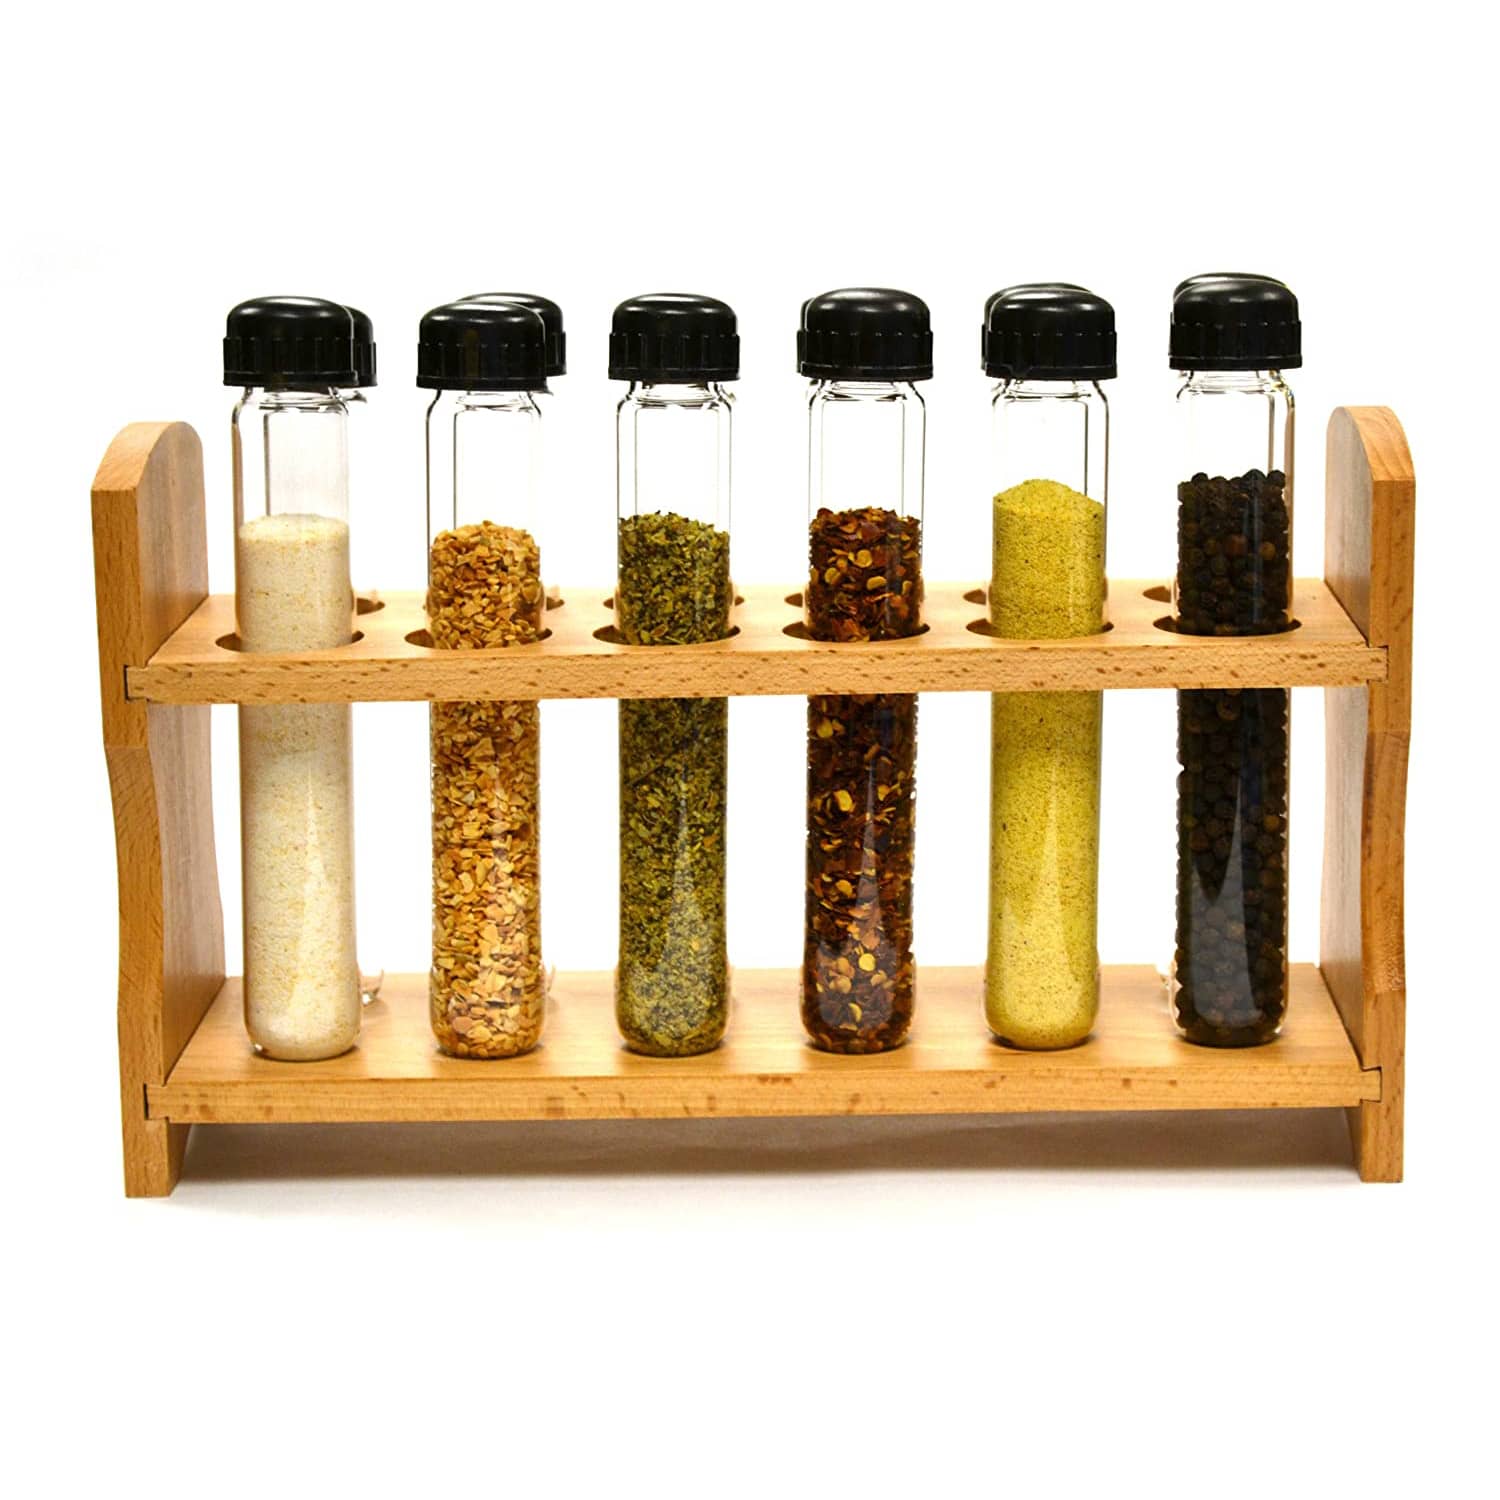 http://cdn.apartmenttherapy.info/image/upload/v1674243042/gen-workflow/product-database/hand-made-test-tube-spice-rack-amazon.jpg